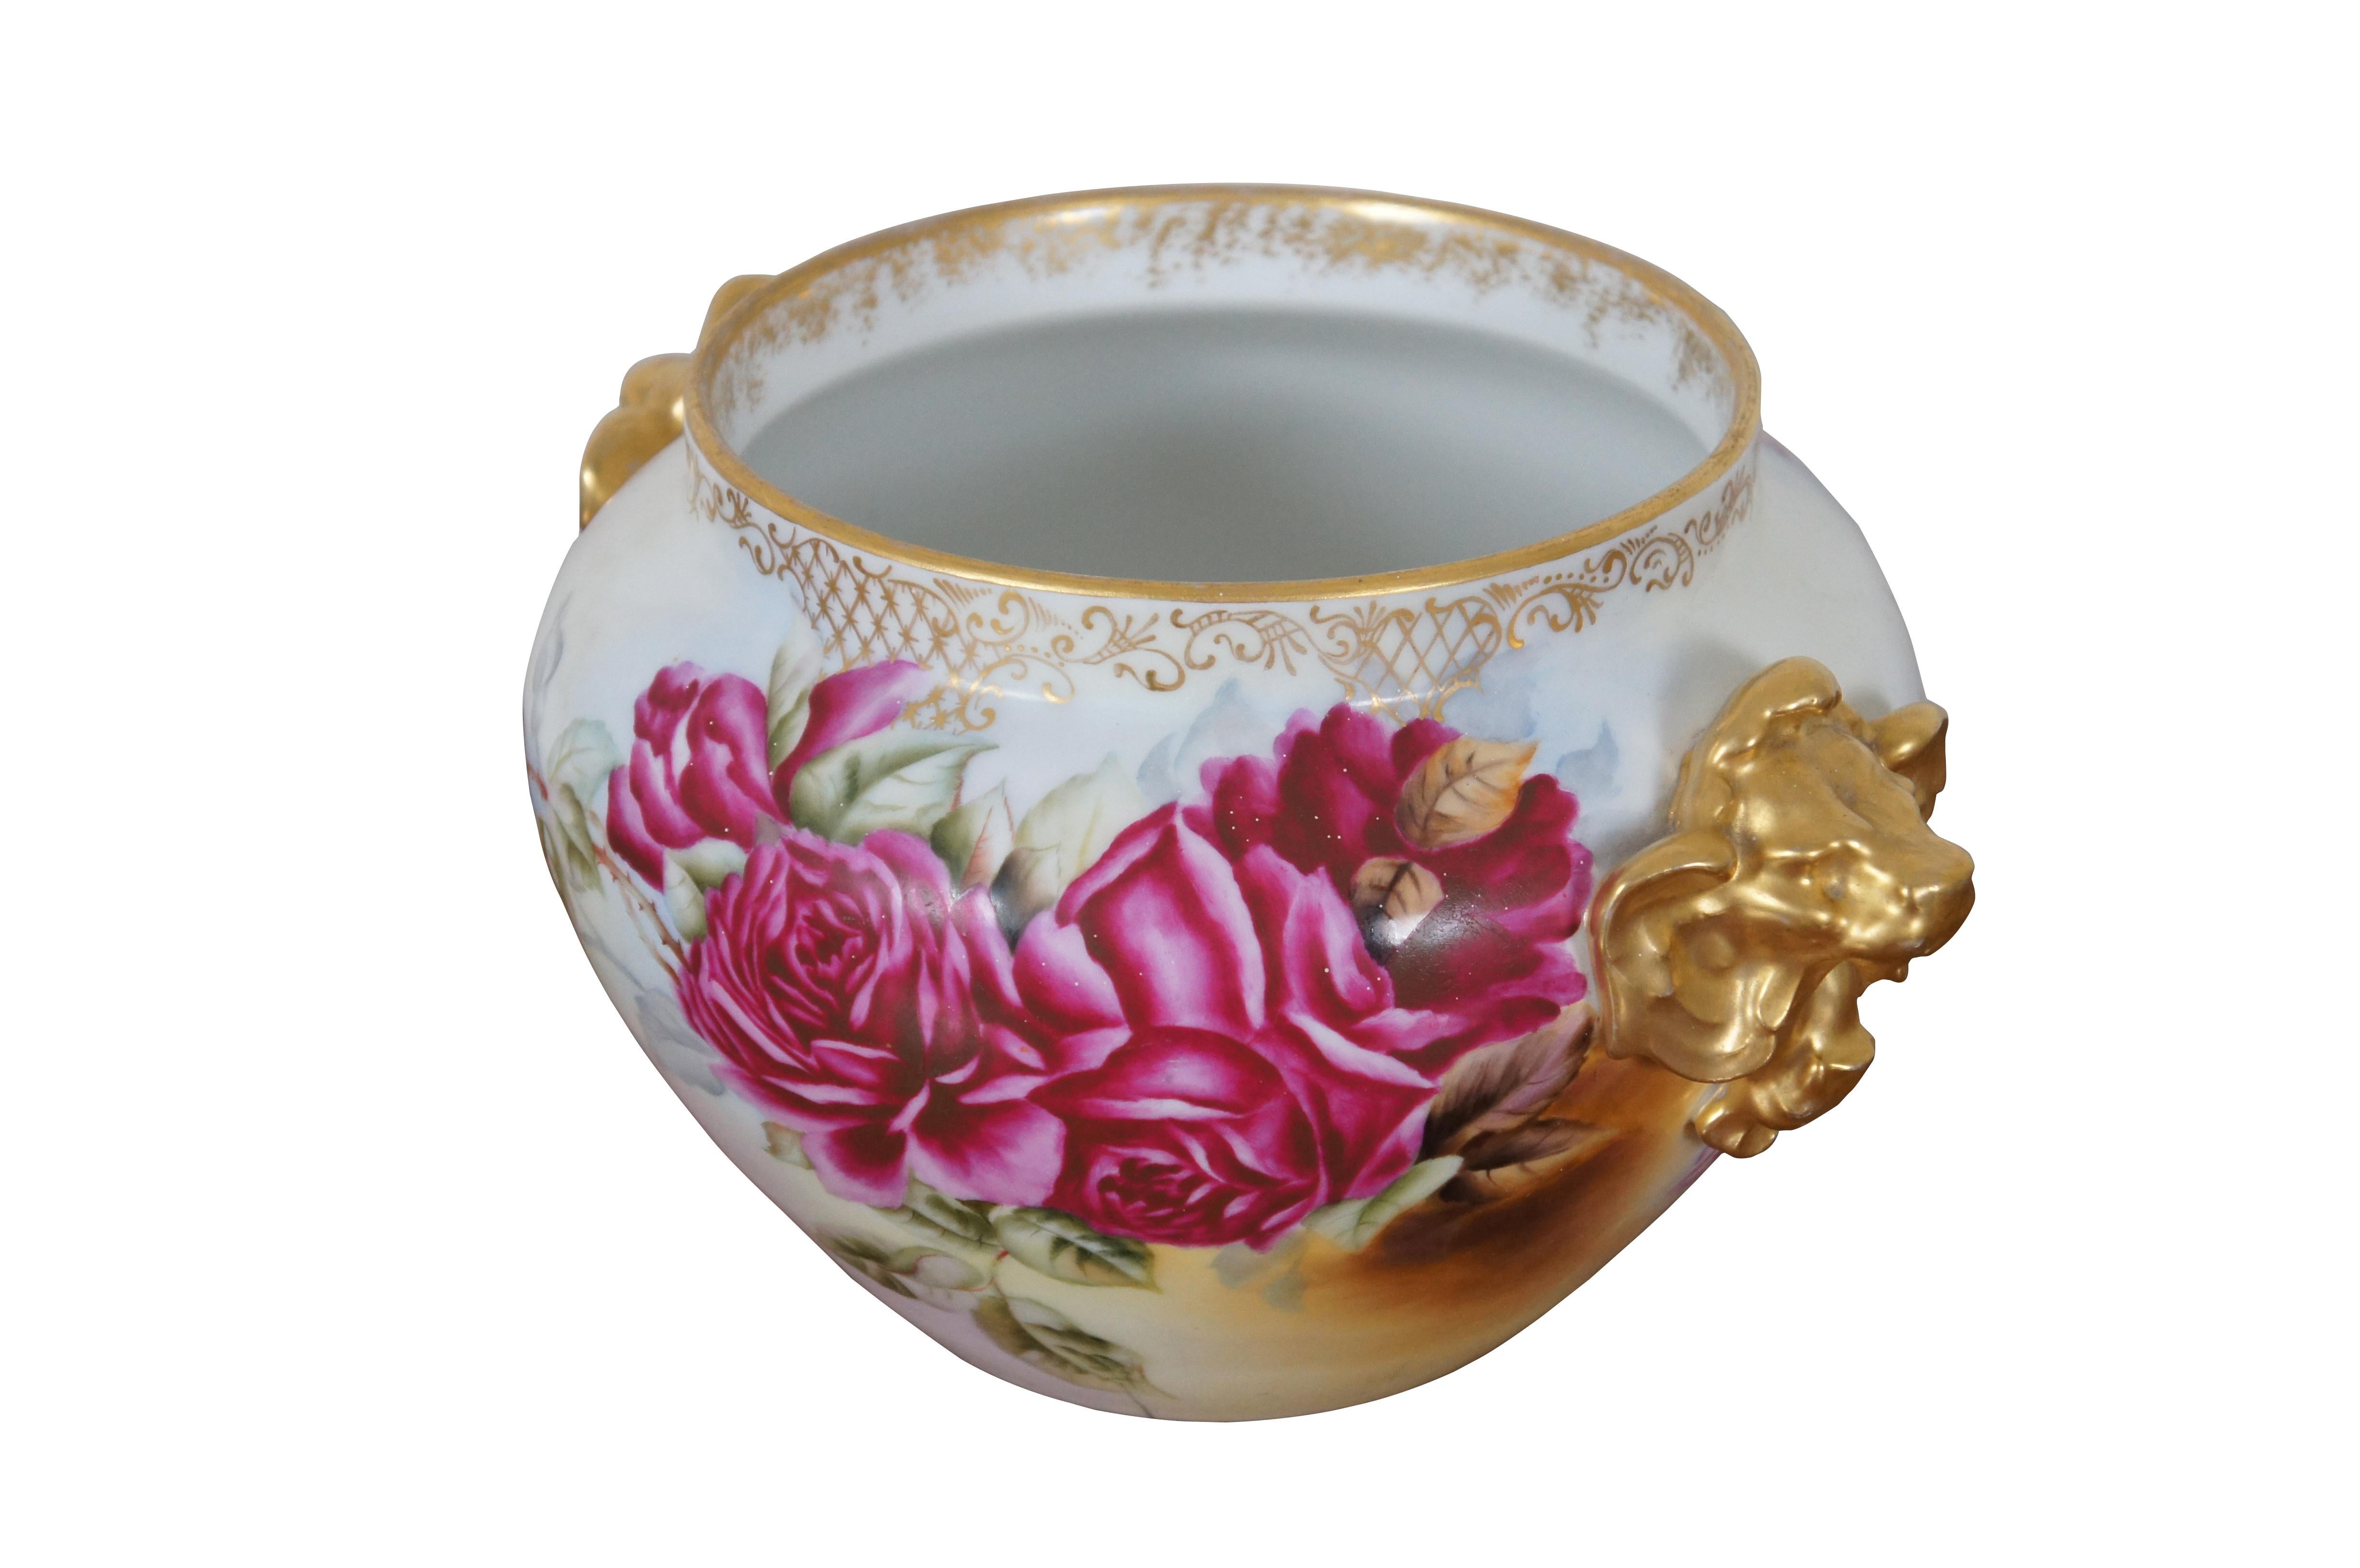 Antique French 1898 D&Co Limoges France cachepot / jar / planter featuring floral rose theme with gold gilded lion handles.  Marked A.H. Nov. 2 - 1898.  D&Co France R. Delinières Limoges 1894 - 1900 mark.

The factory was established in 1863 by Rémi